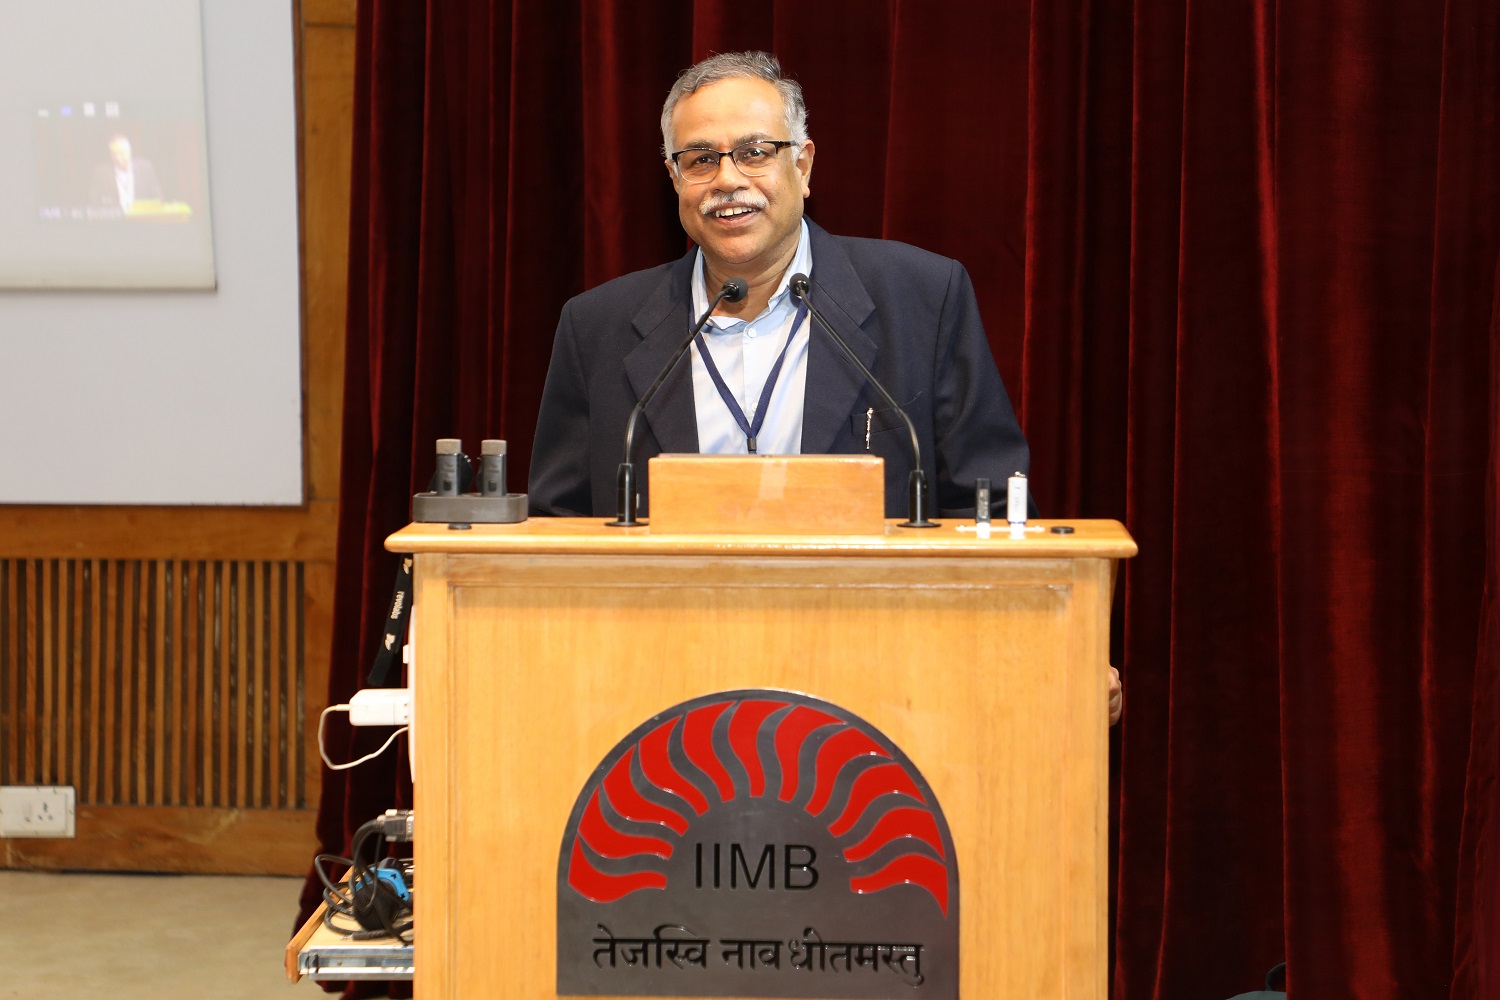 Prof. M Jayadev, Chairperson, Centre for Capital Markets and Risk Management, IIMB, introduces the keynote speaker to the audience.